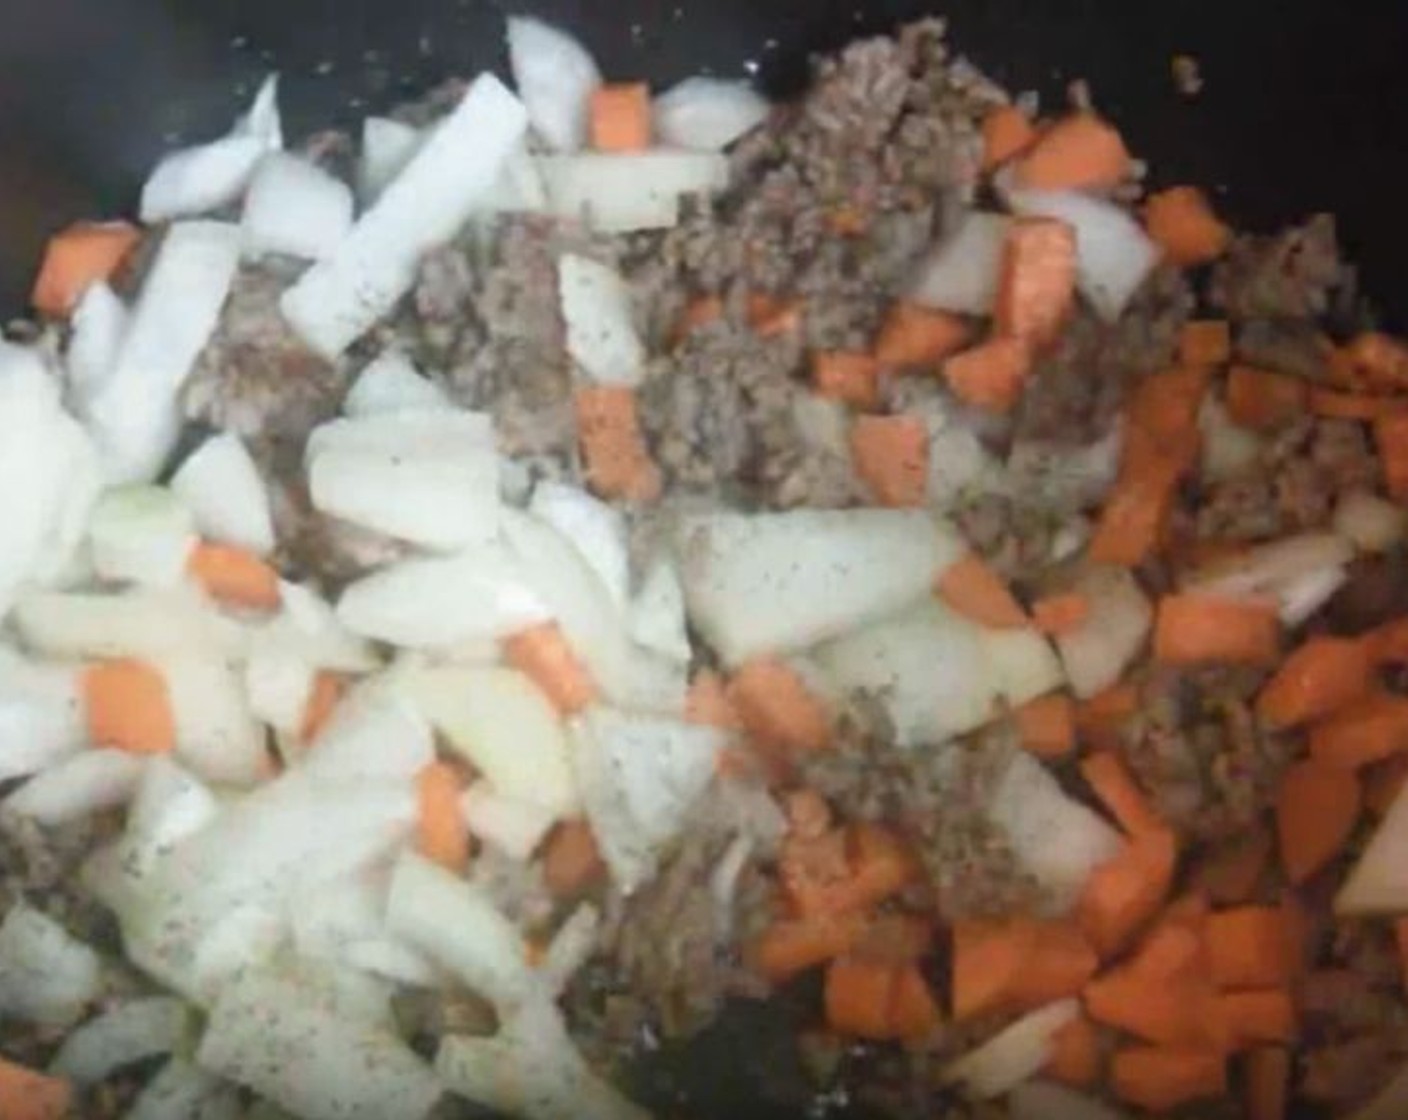 step 2 Add Onion (1 cup), Celery (1 stalk), Carrot (1), Salt (1 tsp), and Ground Black Pepper (1 tsp). Stir. Cook for 1 minute.